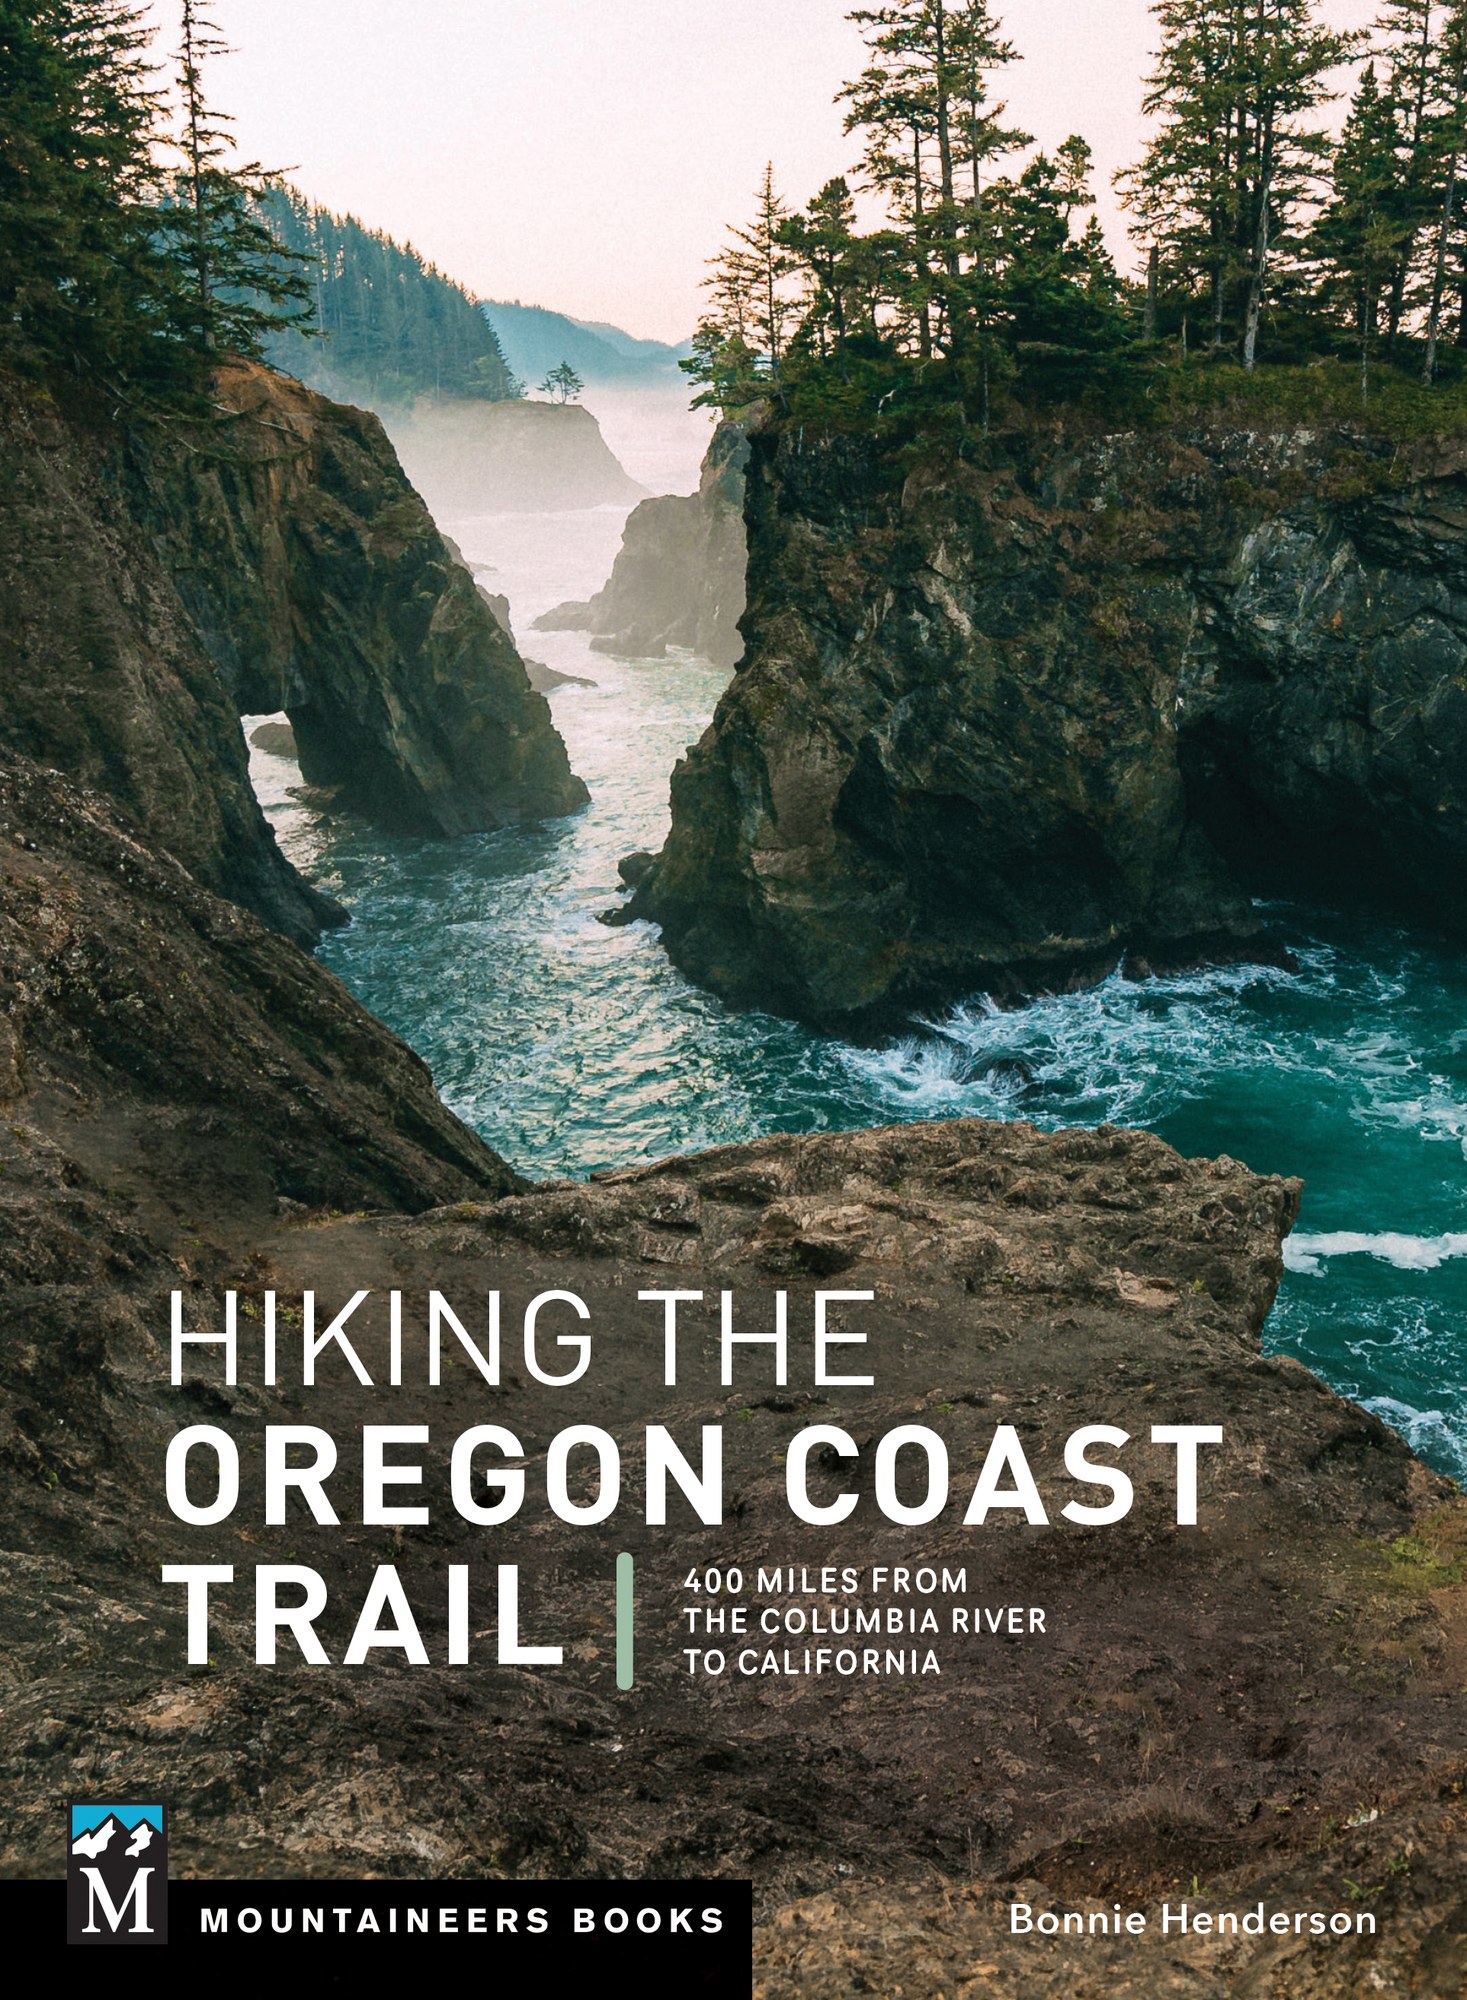 Hiking the Oregon Coast Trail: 400 Miles from the Columbia River